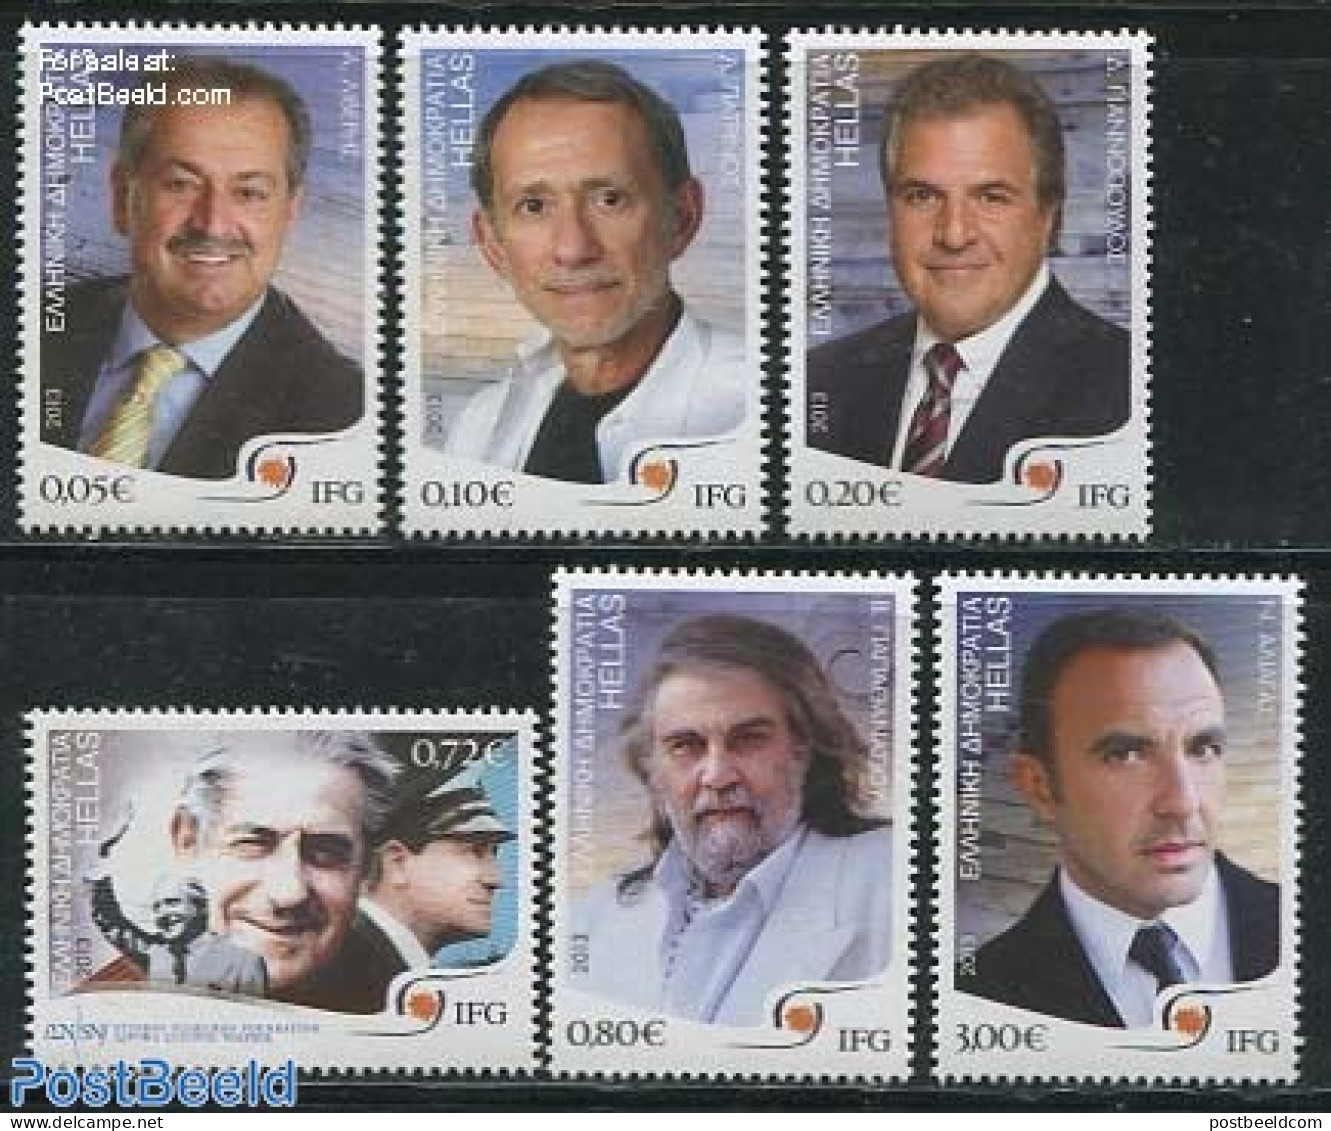 Greece 2013 Personalities 6v, Mint NH - Unused Stamps